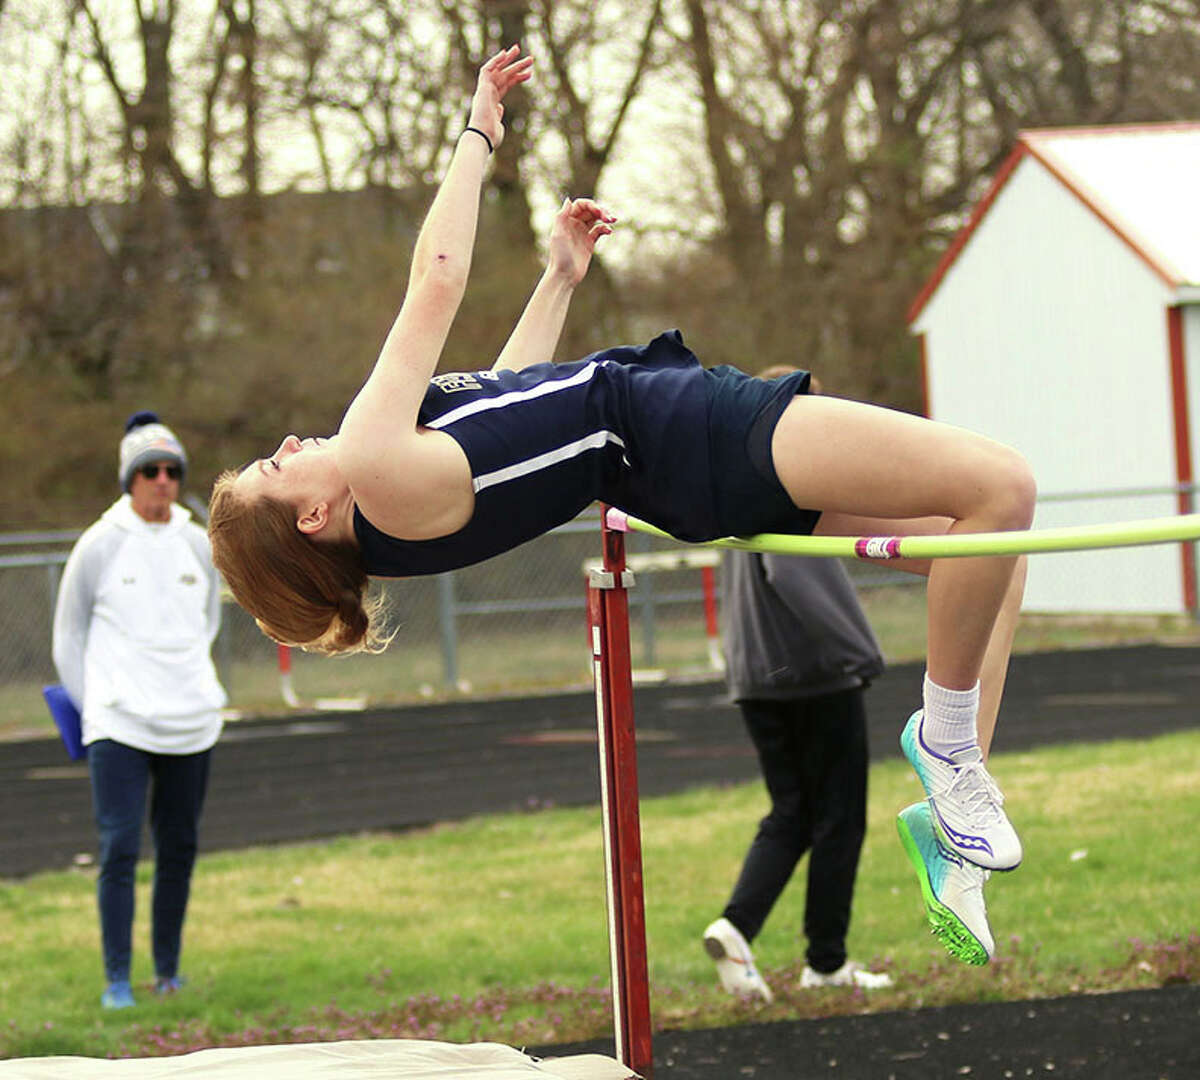 Mia Range clears the bar at 5 feet, 2 inches to win high jump in an eight-team March 29 in Highland. The Father McGivney freshman earlier in March won an indoor state title by going 5-3 1/2 at the Top Times Indoor Championships in Bloomington.